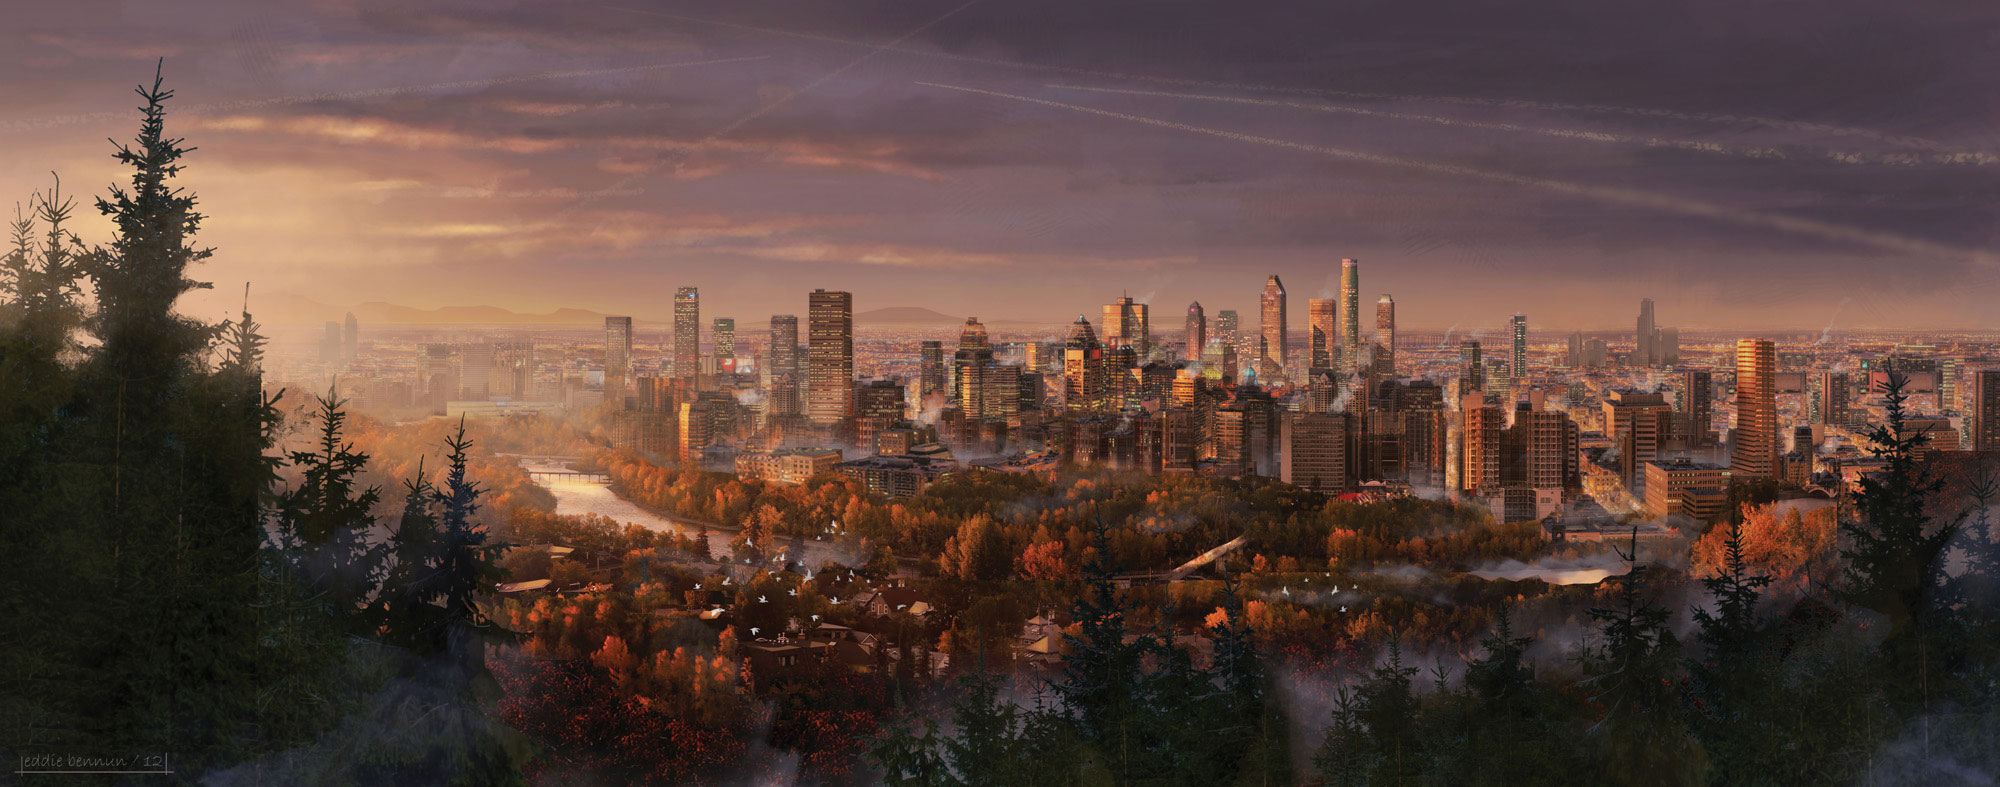 Fine Art: Assassin’s Creed IV Isn’t All Rum And Beaches. There’s Montreal Too.